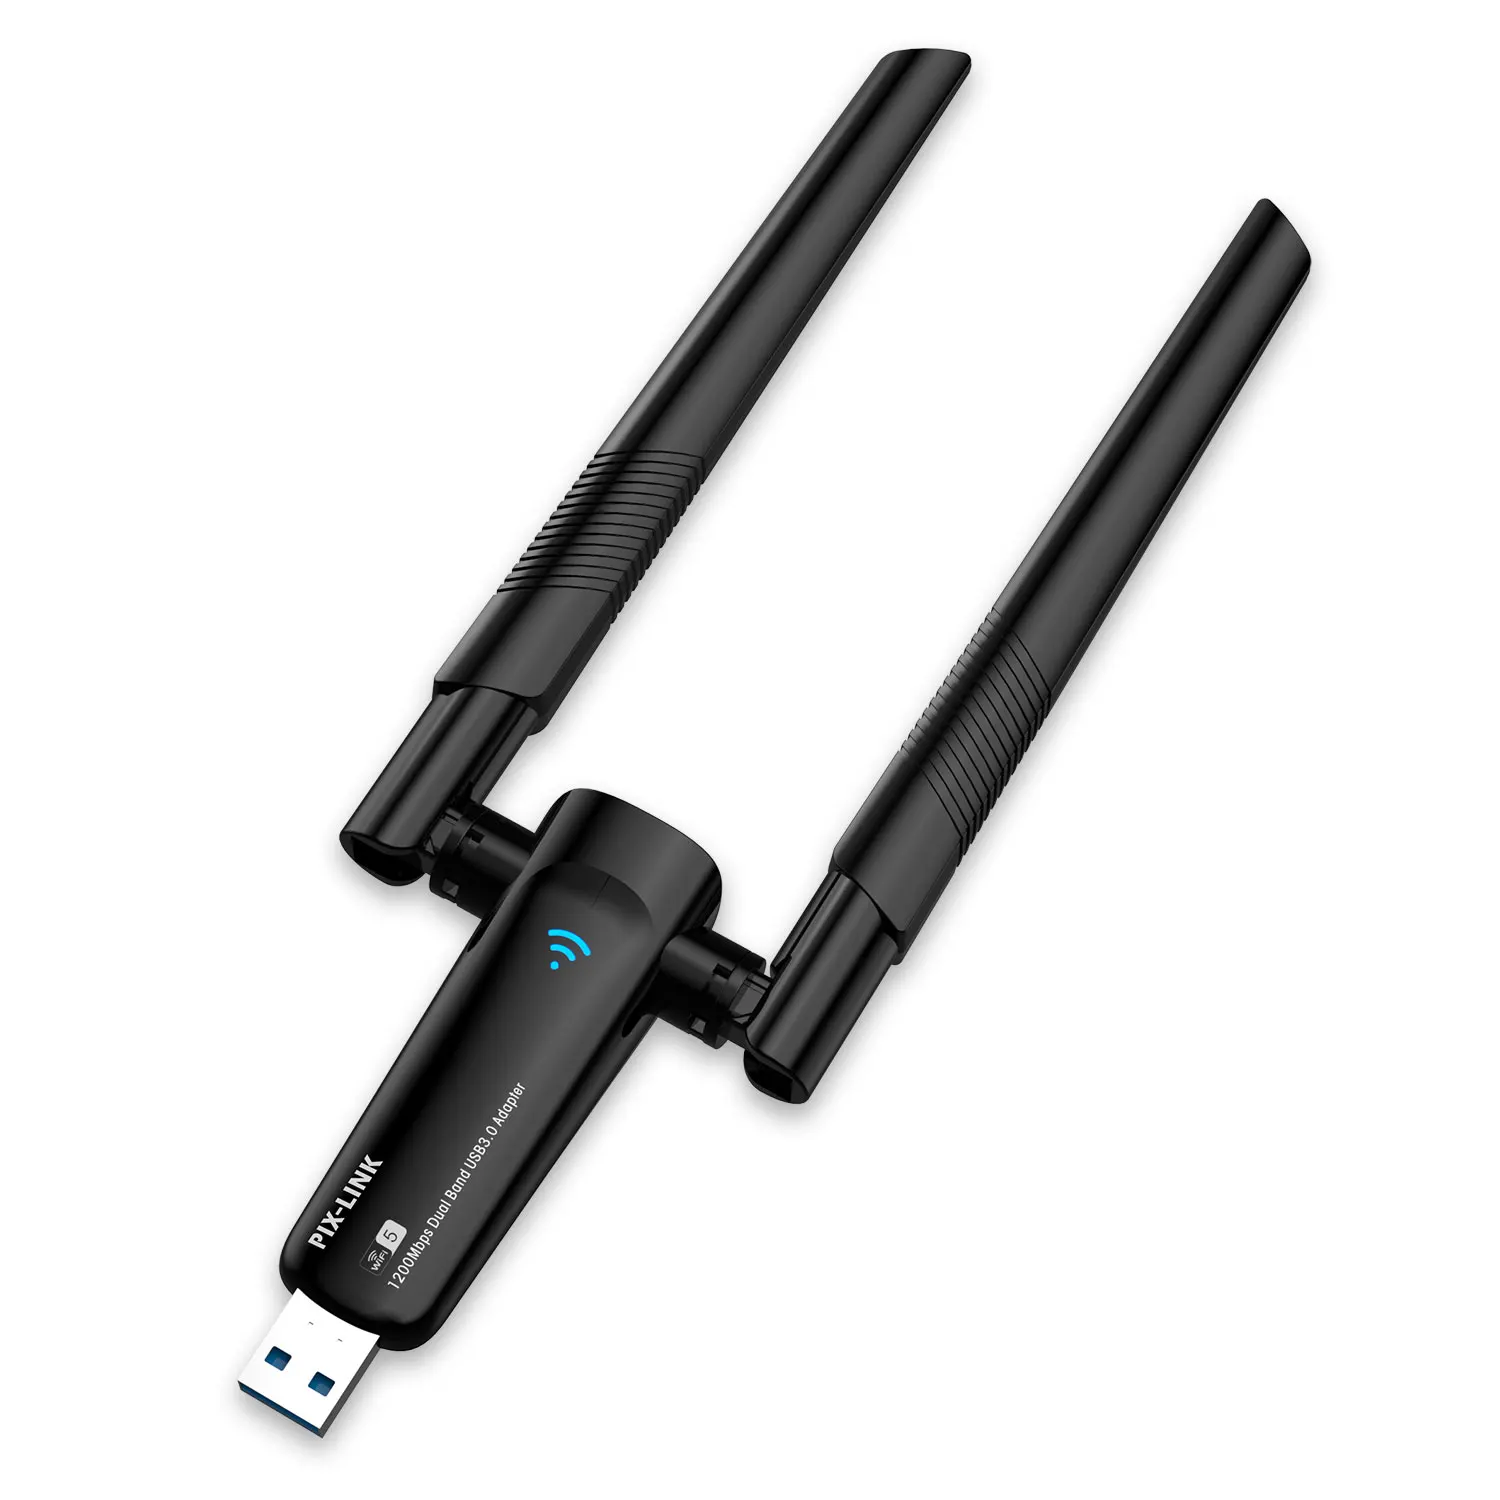 Wifi Adapter W311Mi Usb 150Mbps Wireless Network Dongle For Pc/Desktop/Laptop Free Driver Dual Band 2.4G/5G